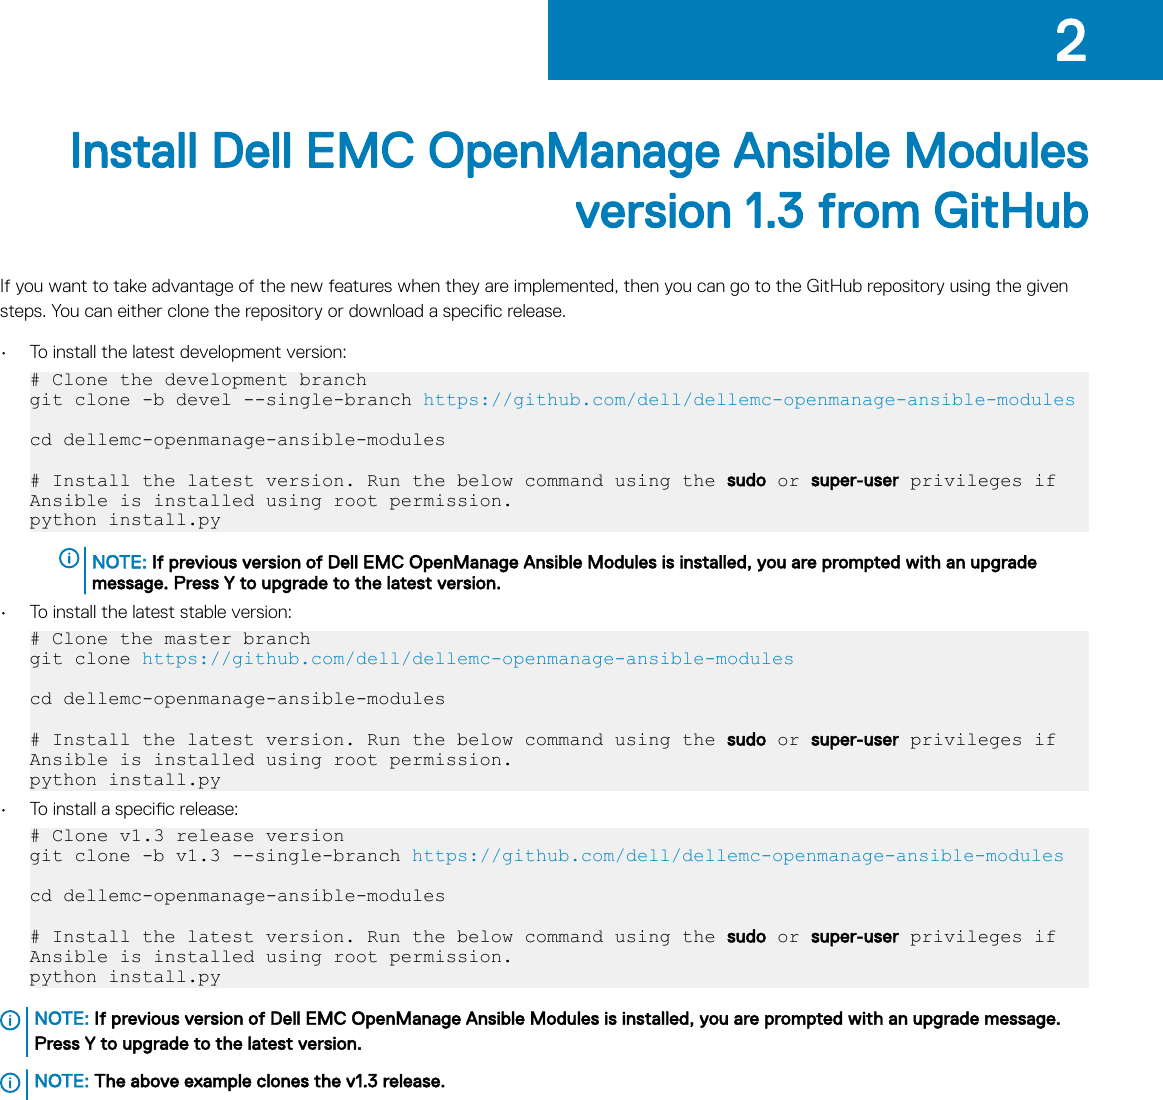 Page 6 of 7 - Dell EMC OpenManage Ansible Modules Version 1.3 Installation Guide OMAM Install